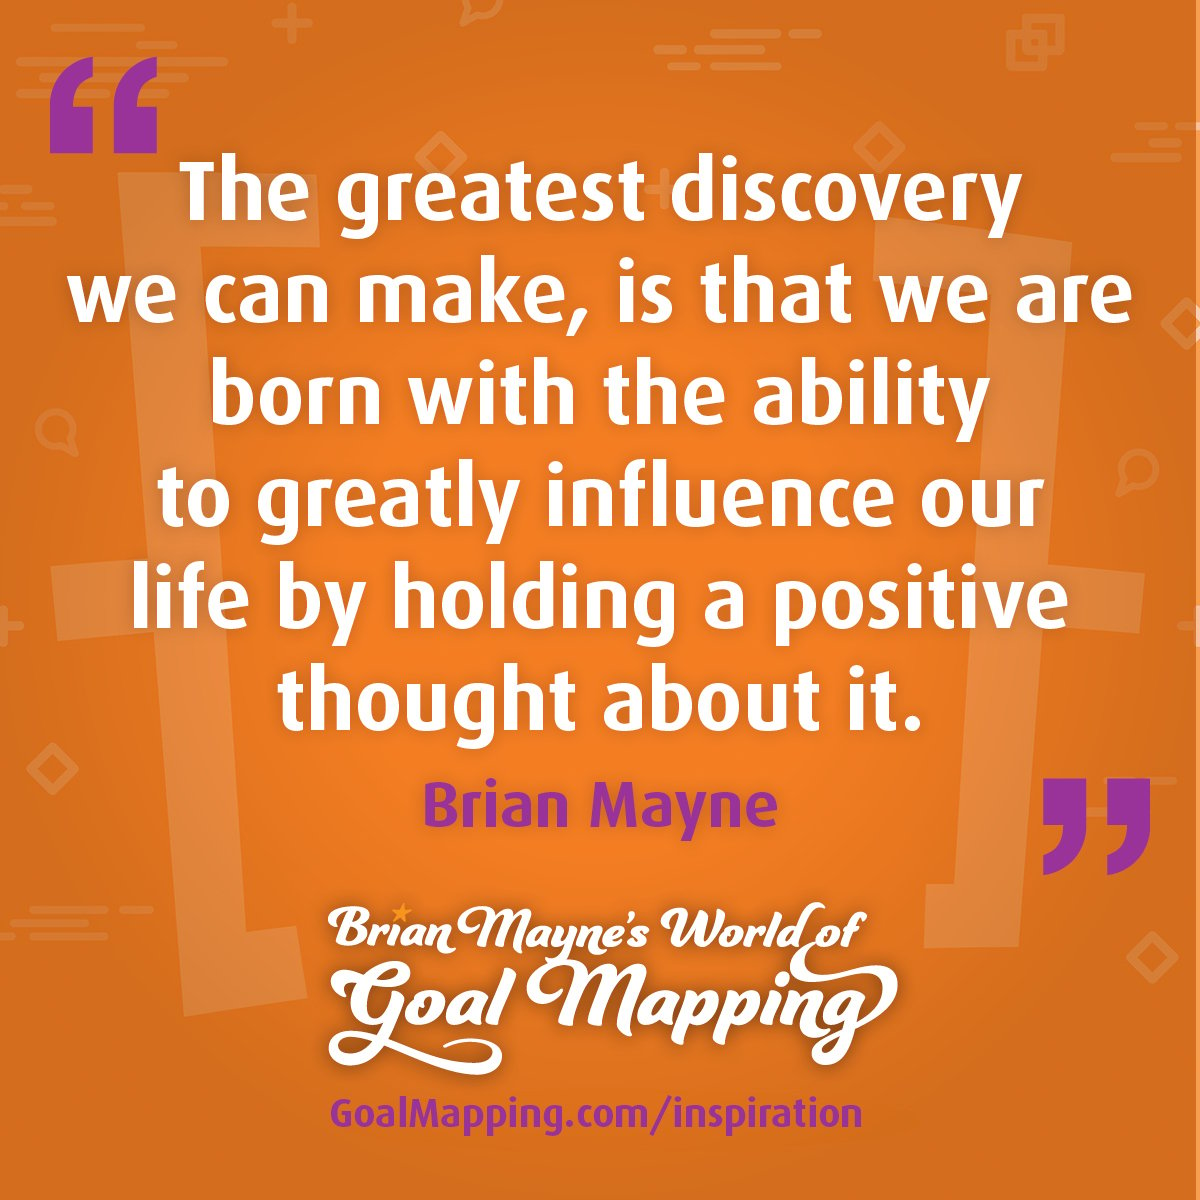 "The greatest discovery we can make, is that we are born with the ability to greatly influence our life by holding a positive thought about it." Brian Mayne